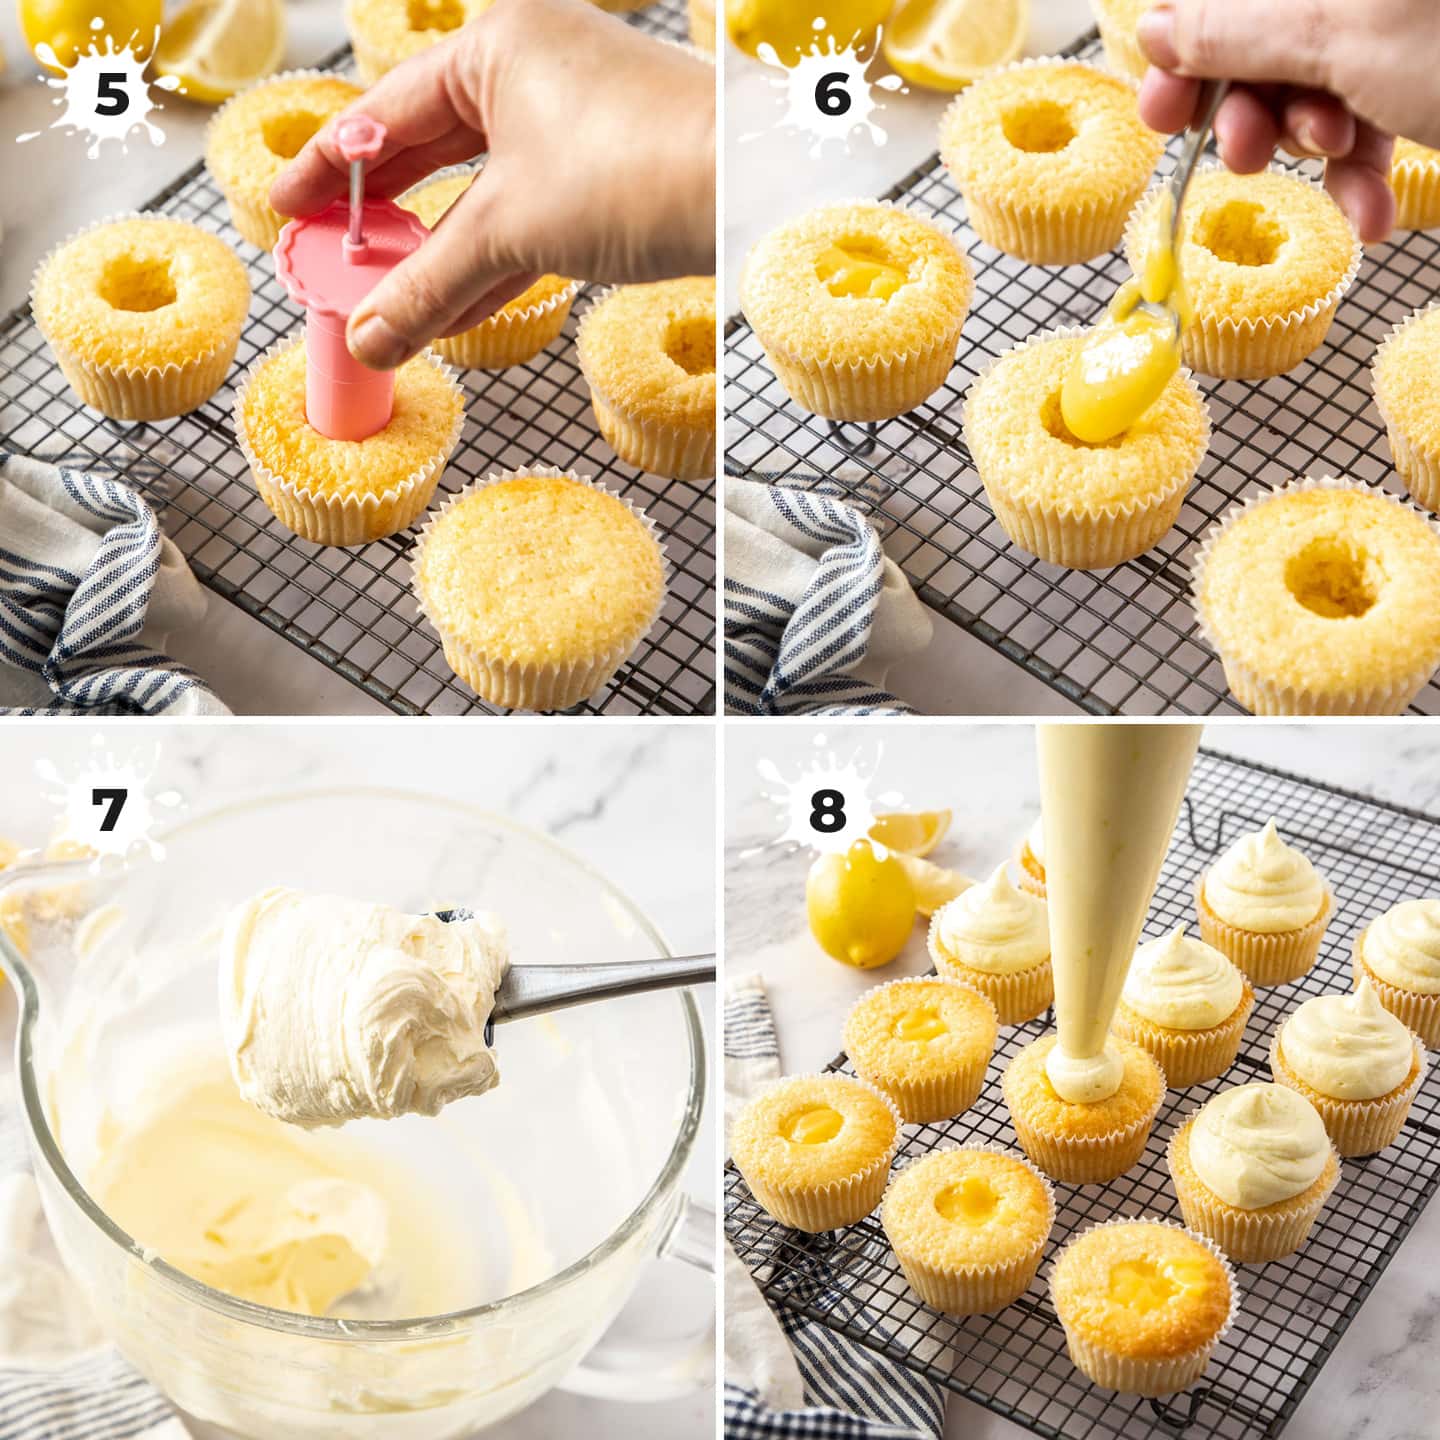 4 images showing the filling and assembling of the lemon cupcakes.